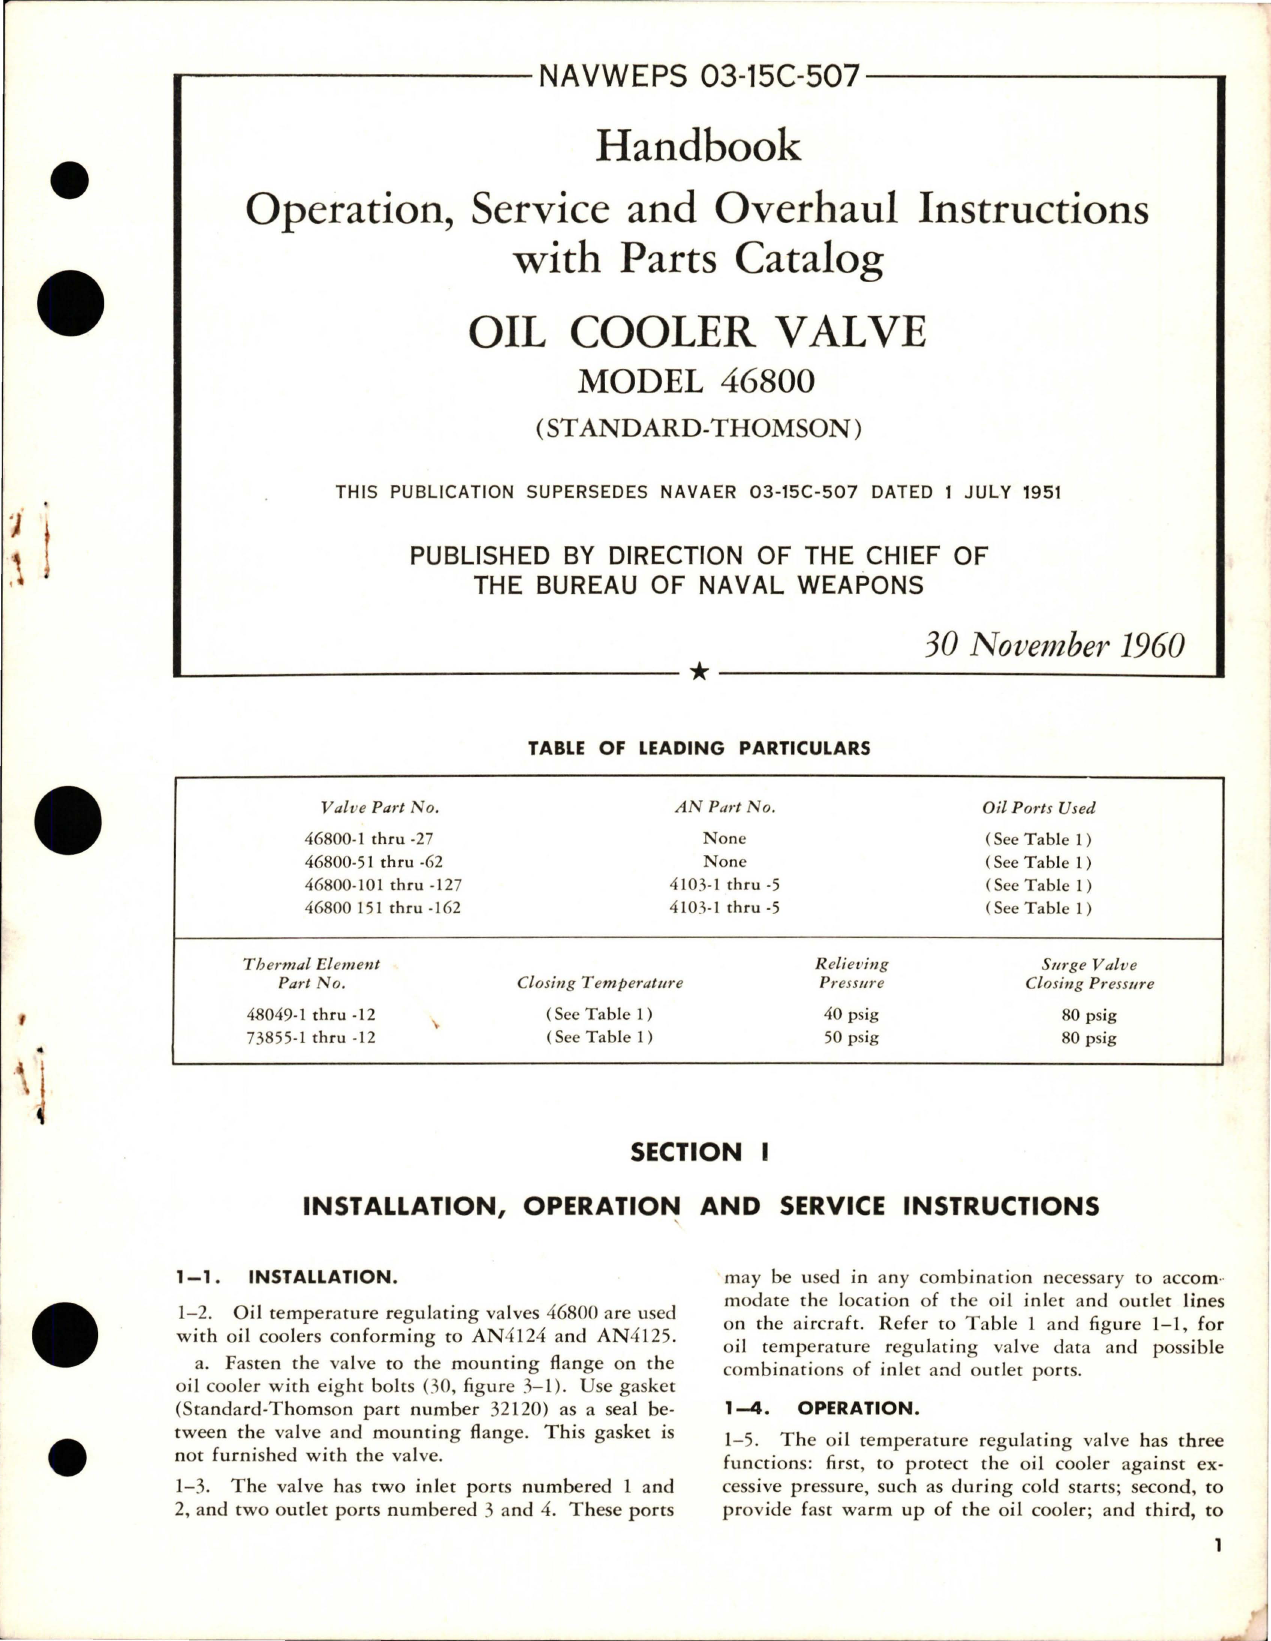 Sample page 1 from AirCorps Library document: Operation, Service and Overhaul Instructions with Parts Catalog for Oil Cooler Valve - Model 46800